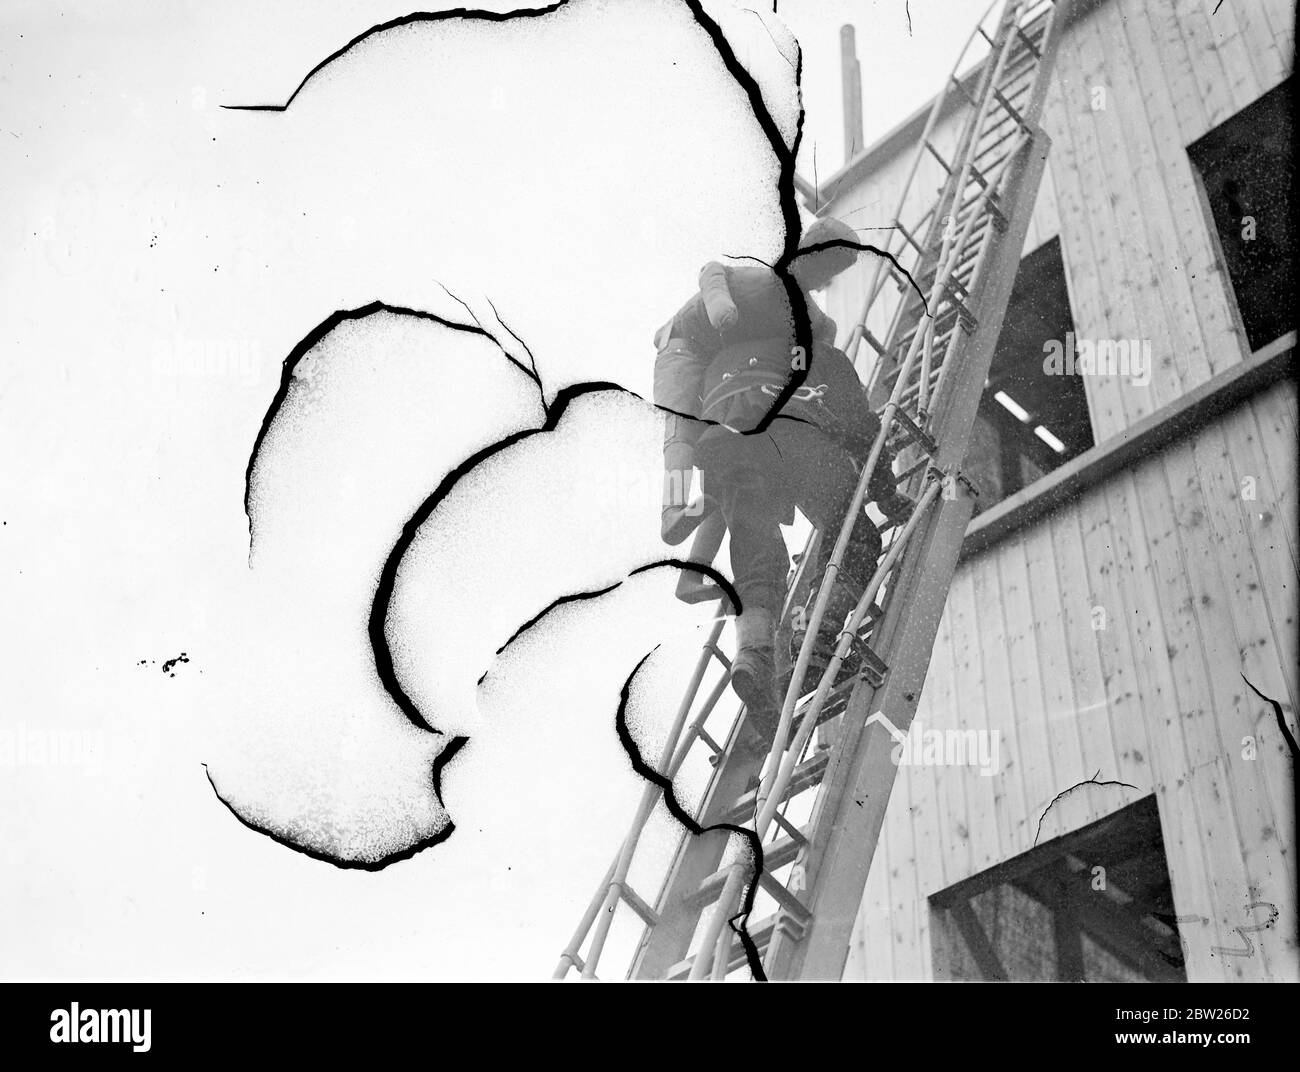 Rescue competition in Fire Brigades tournament at Guilford. The finest fire fighters in the country representative of 1,000 brigades took part in the Ntional Fire Brigades Association competitions at Guilford, Surrey. Photo shows, Firemen carrying out a rescue in the competitions. 4 July 1938 Stock Photo